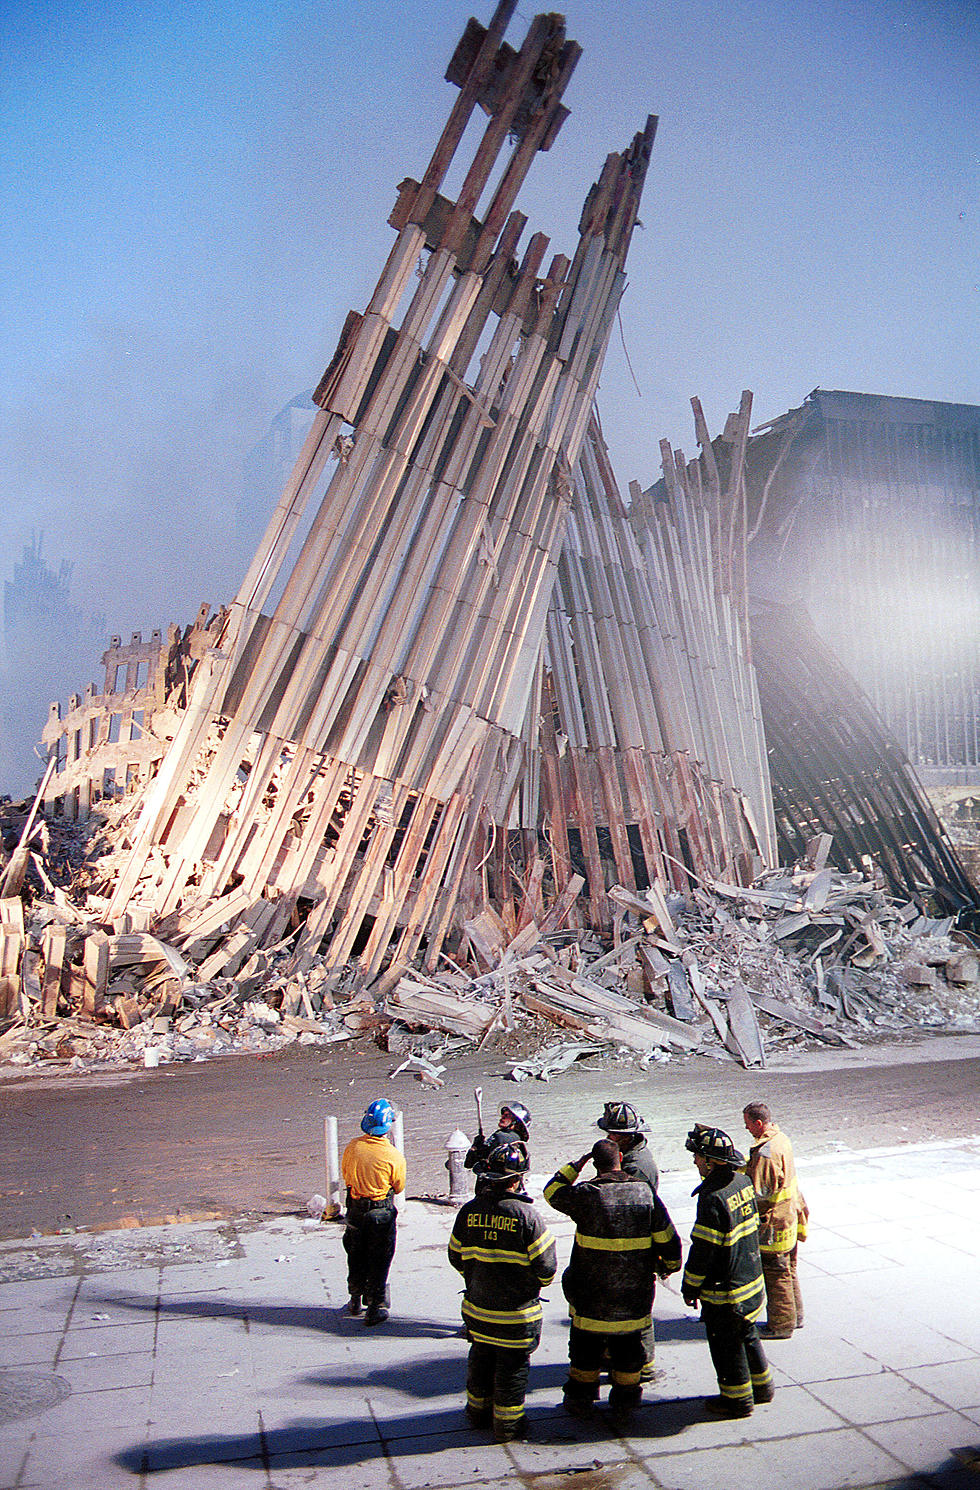 9/11 — The Images Forever Etched in Our Memory